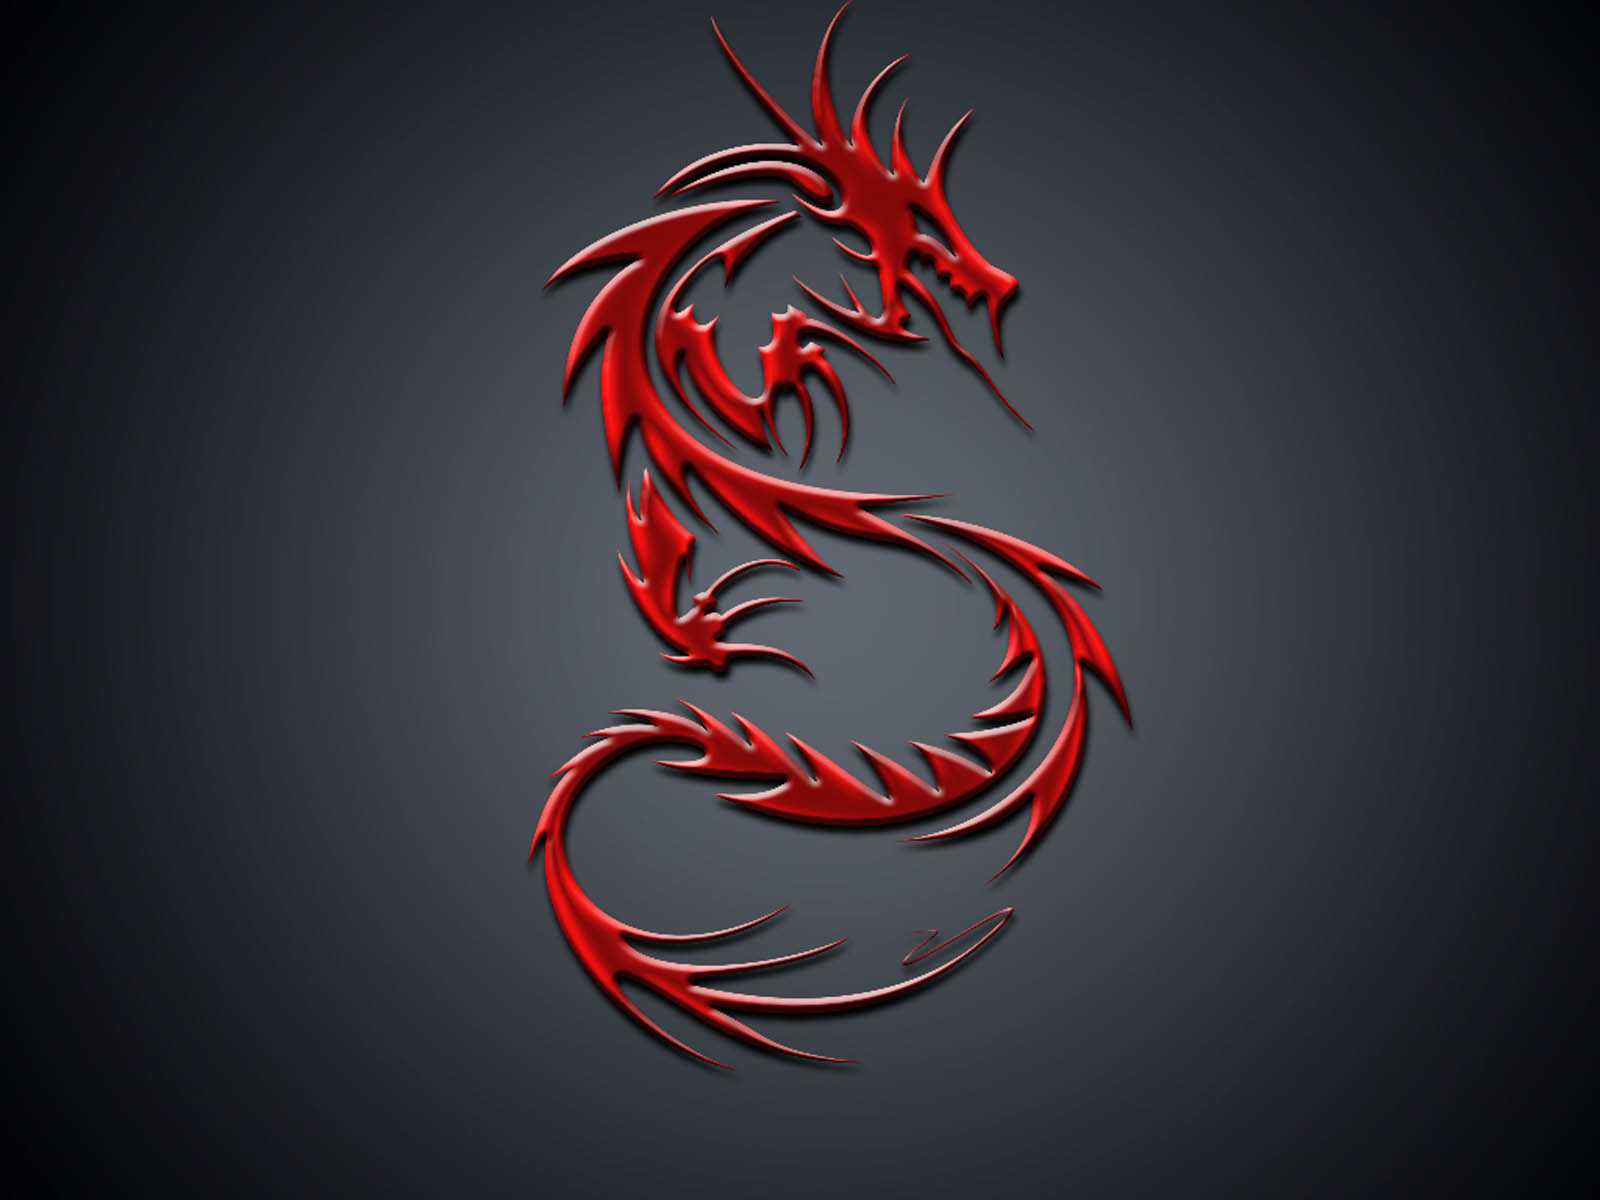 are watching the Dragon Wallpapers Dragon Desktop Wallpapers Dragon